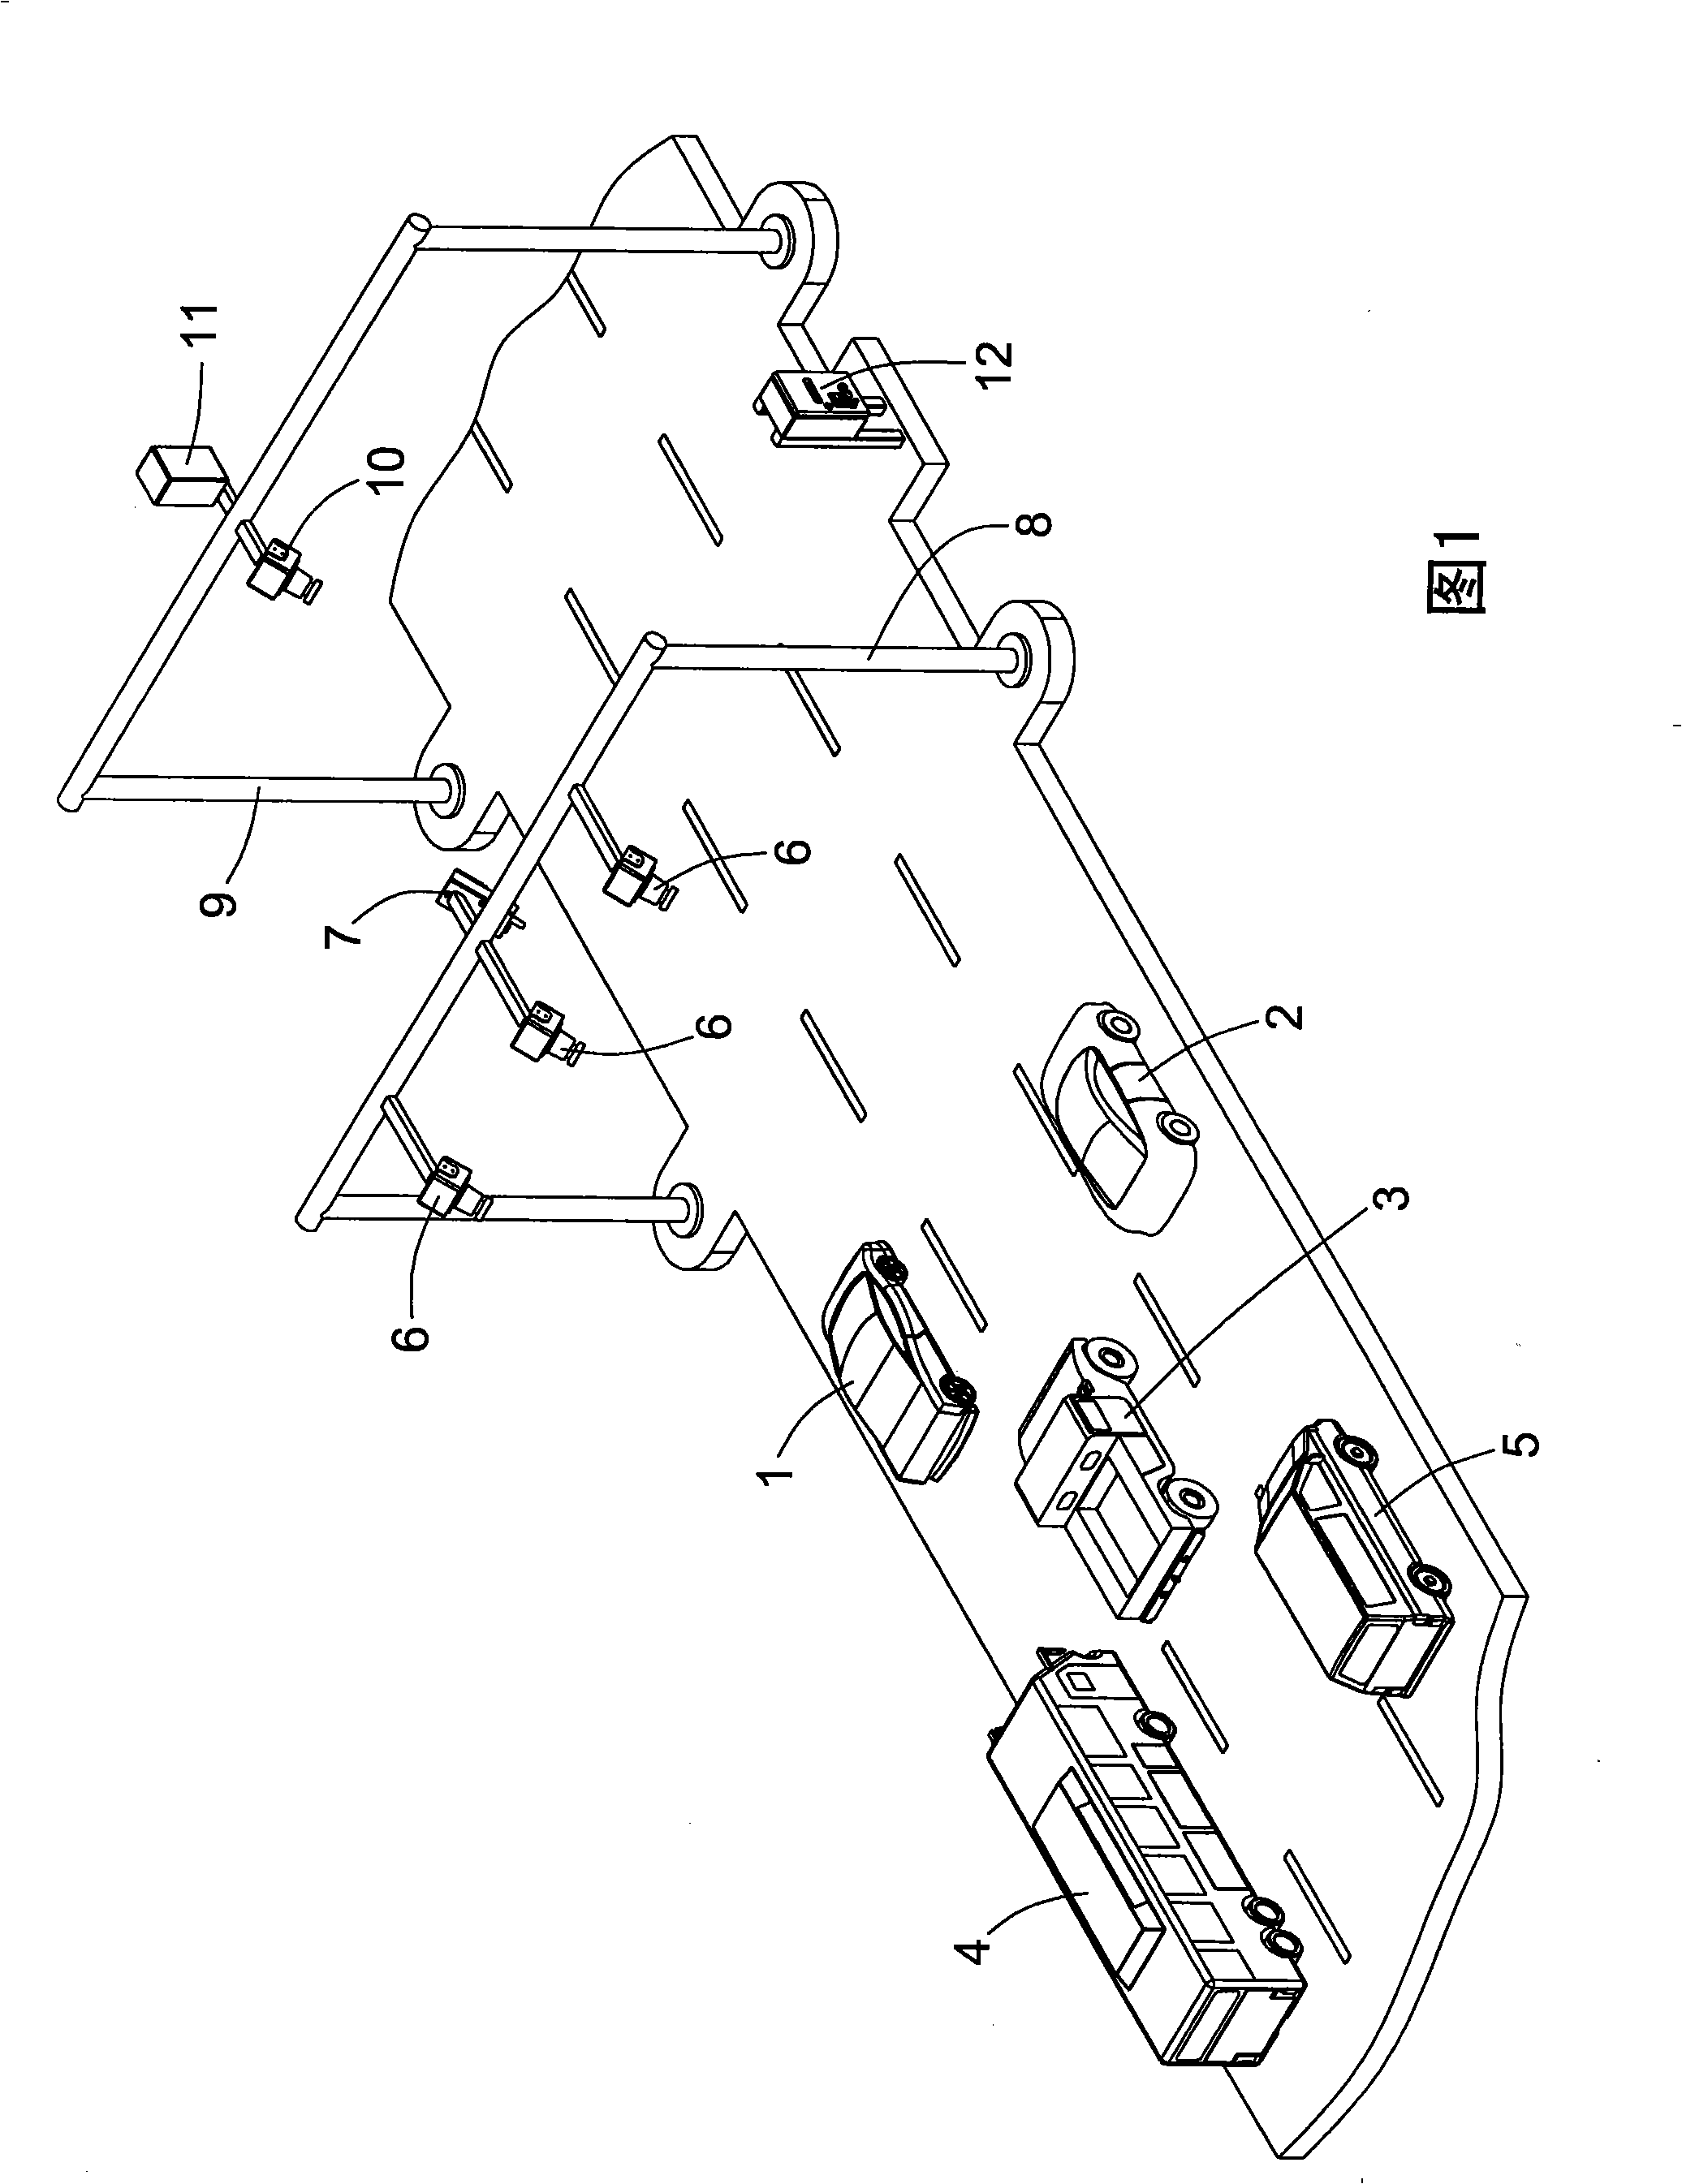 Method for locating and controlling multilane free flow video vehicle